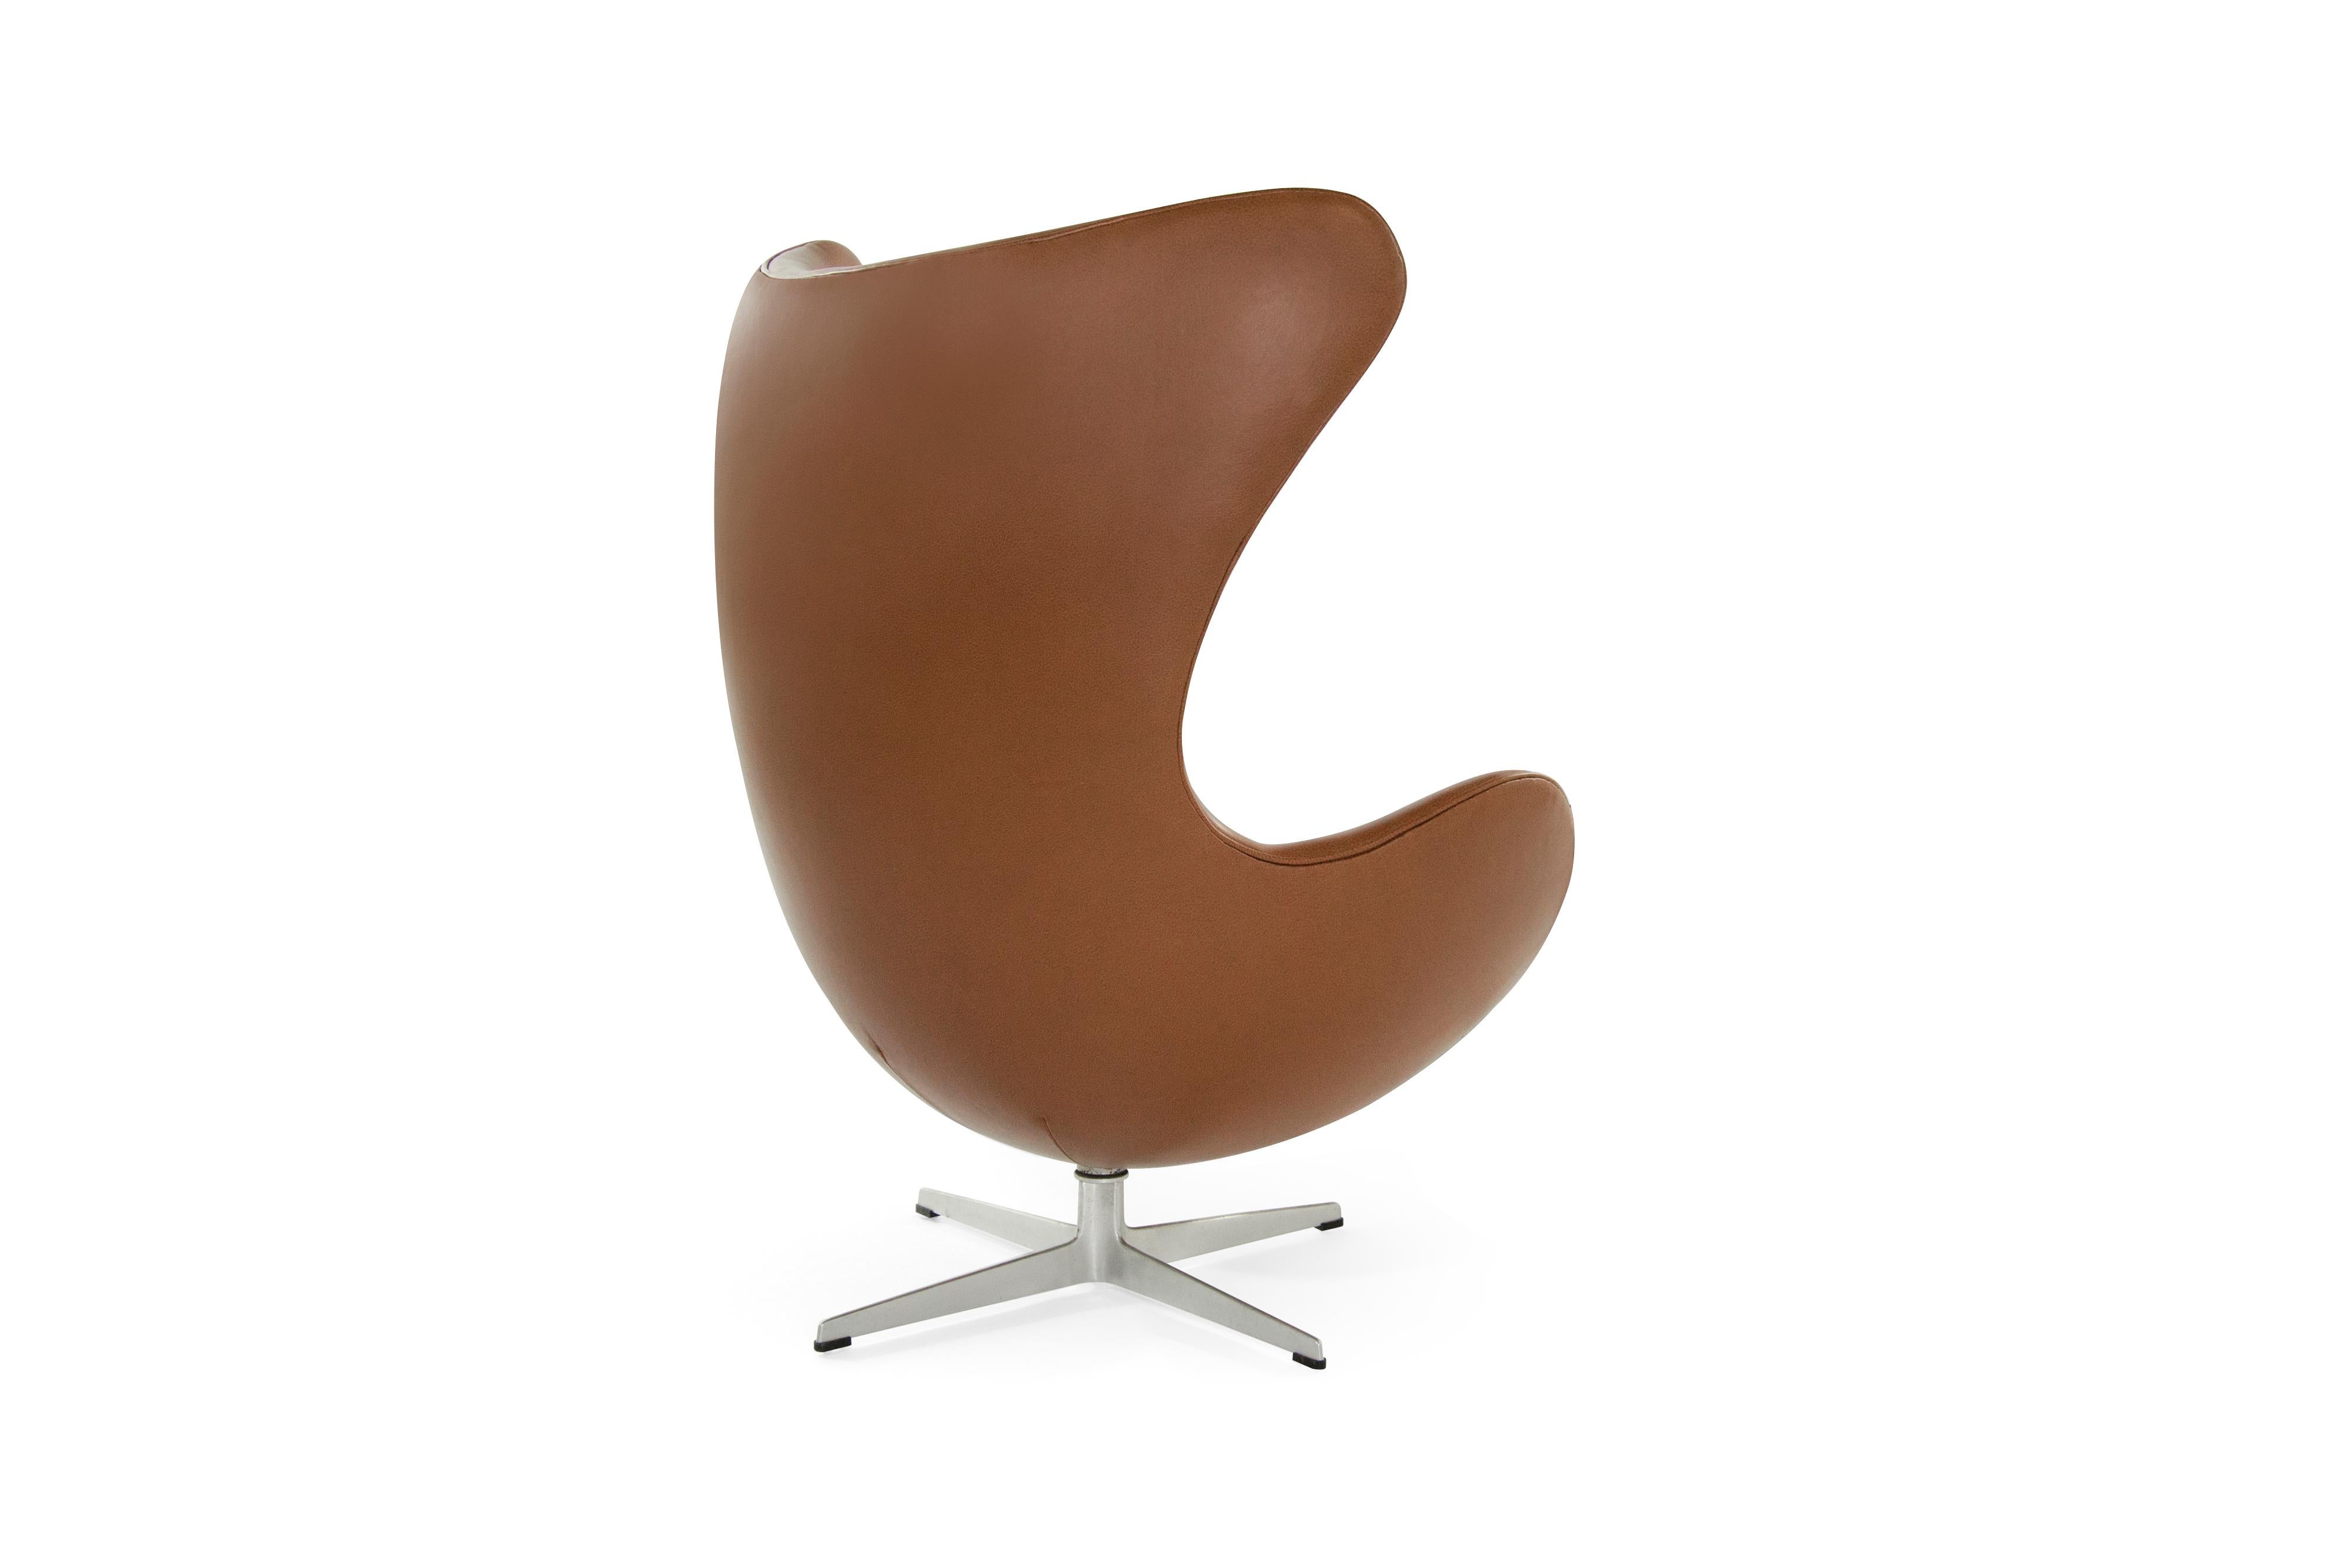 The iconic egg chair, model 3316, designed by Arne Jacobsen. Produced by Fritz Hansen in Denmark, 1966. Newly upholstered in natural leather.